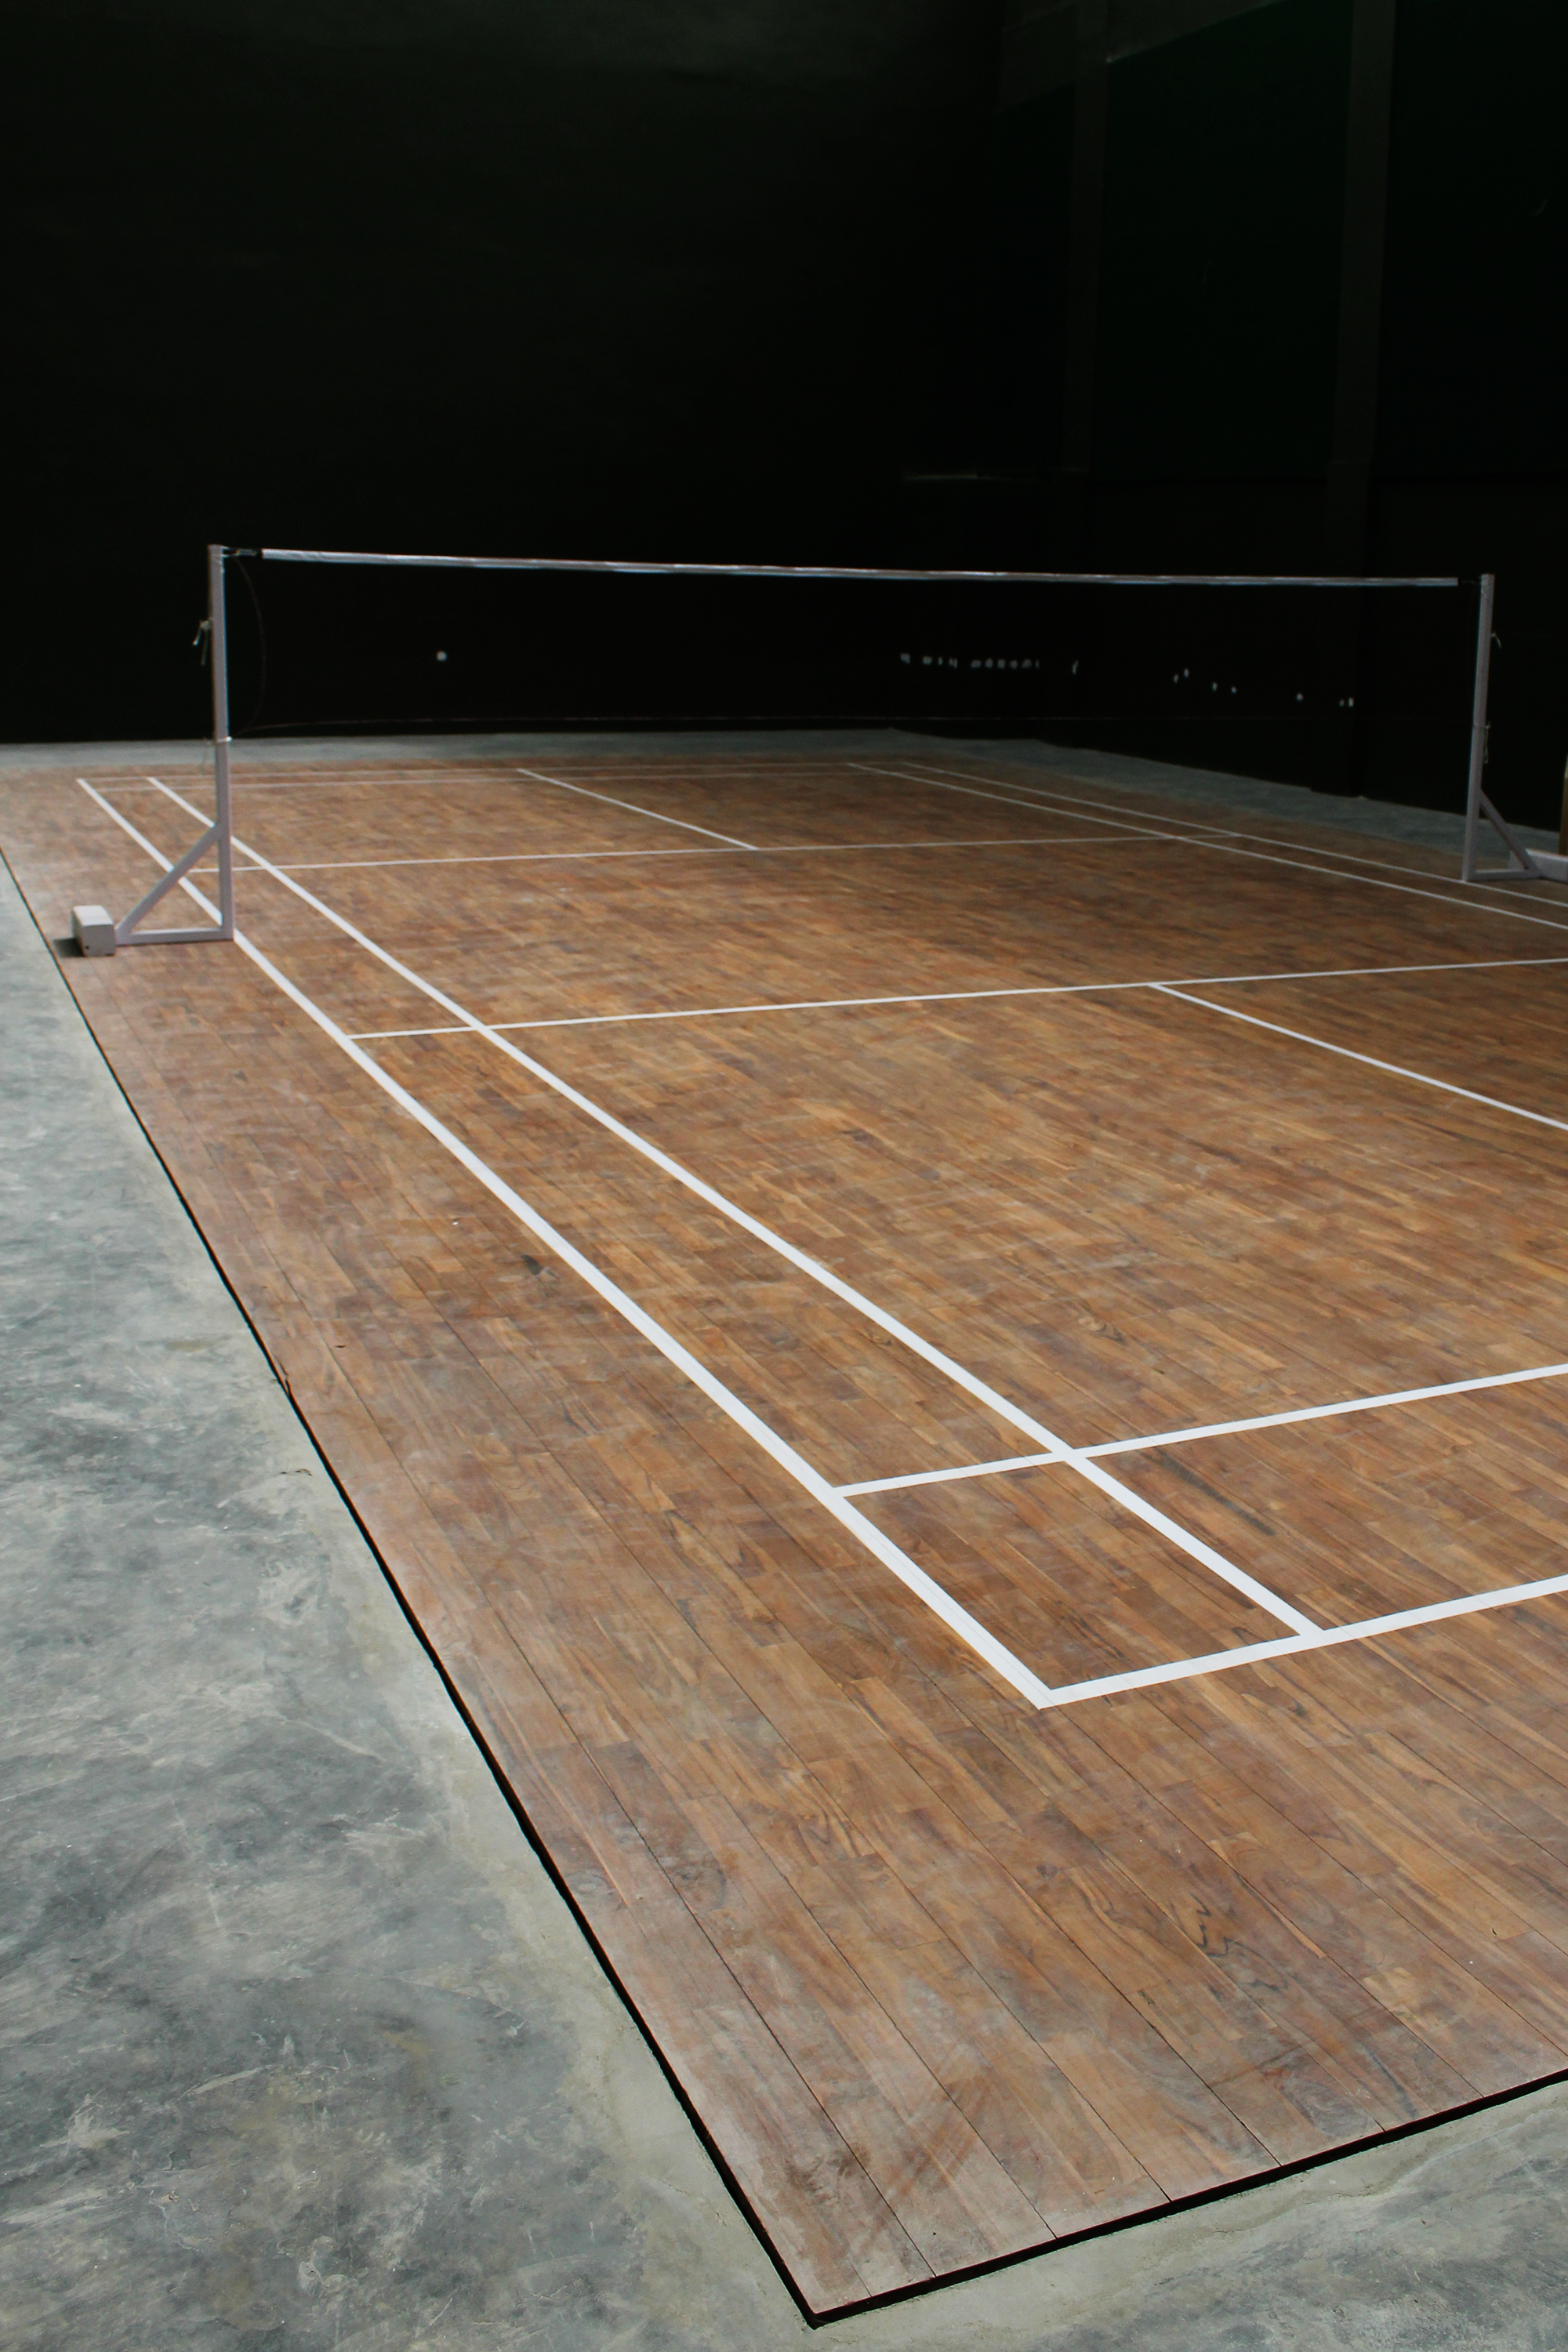 Wood Surface Badminton Court Links Image And Photos